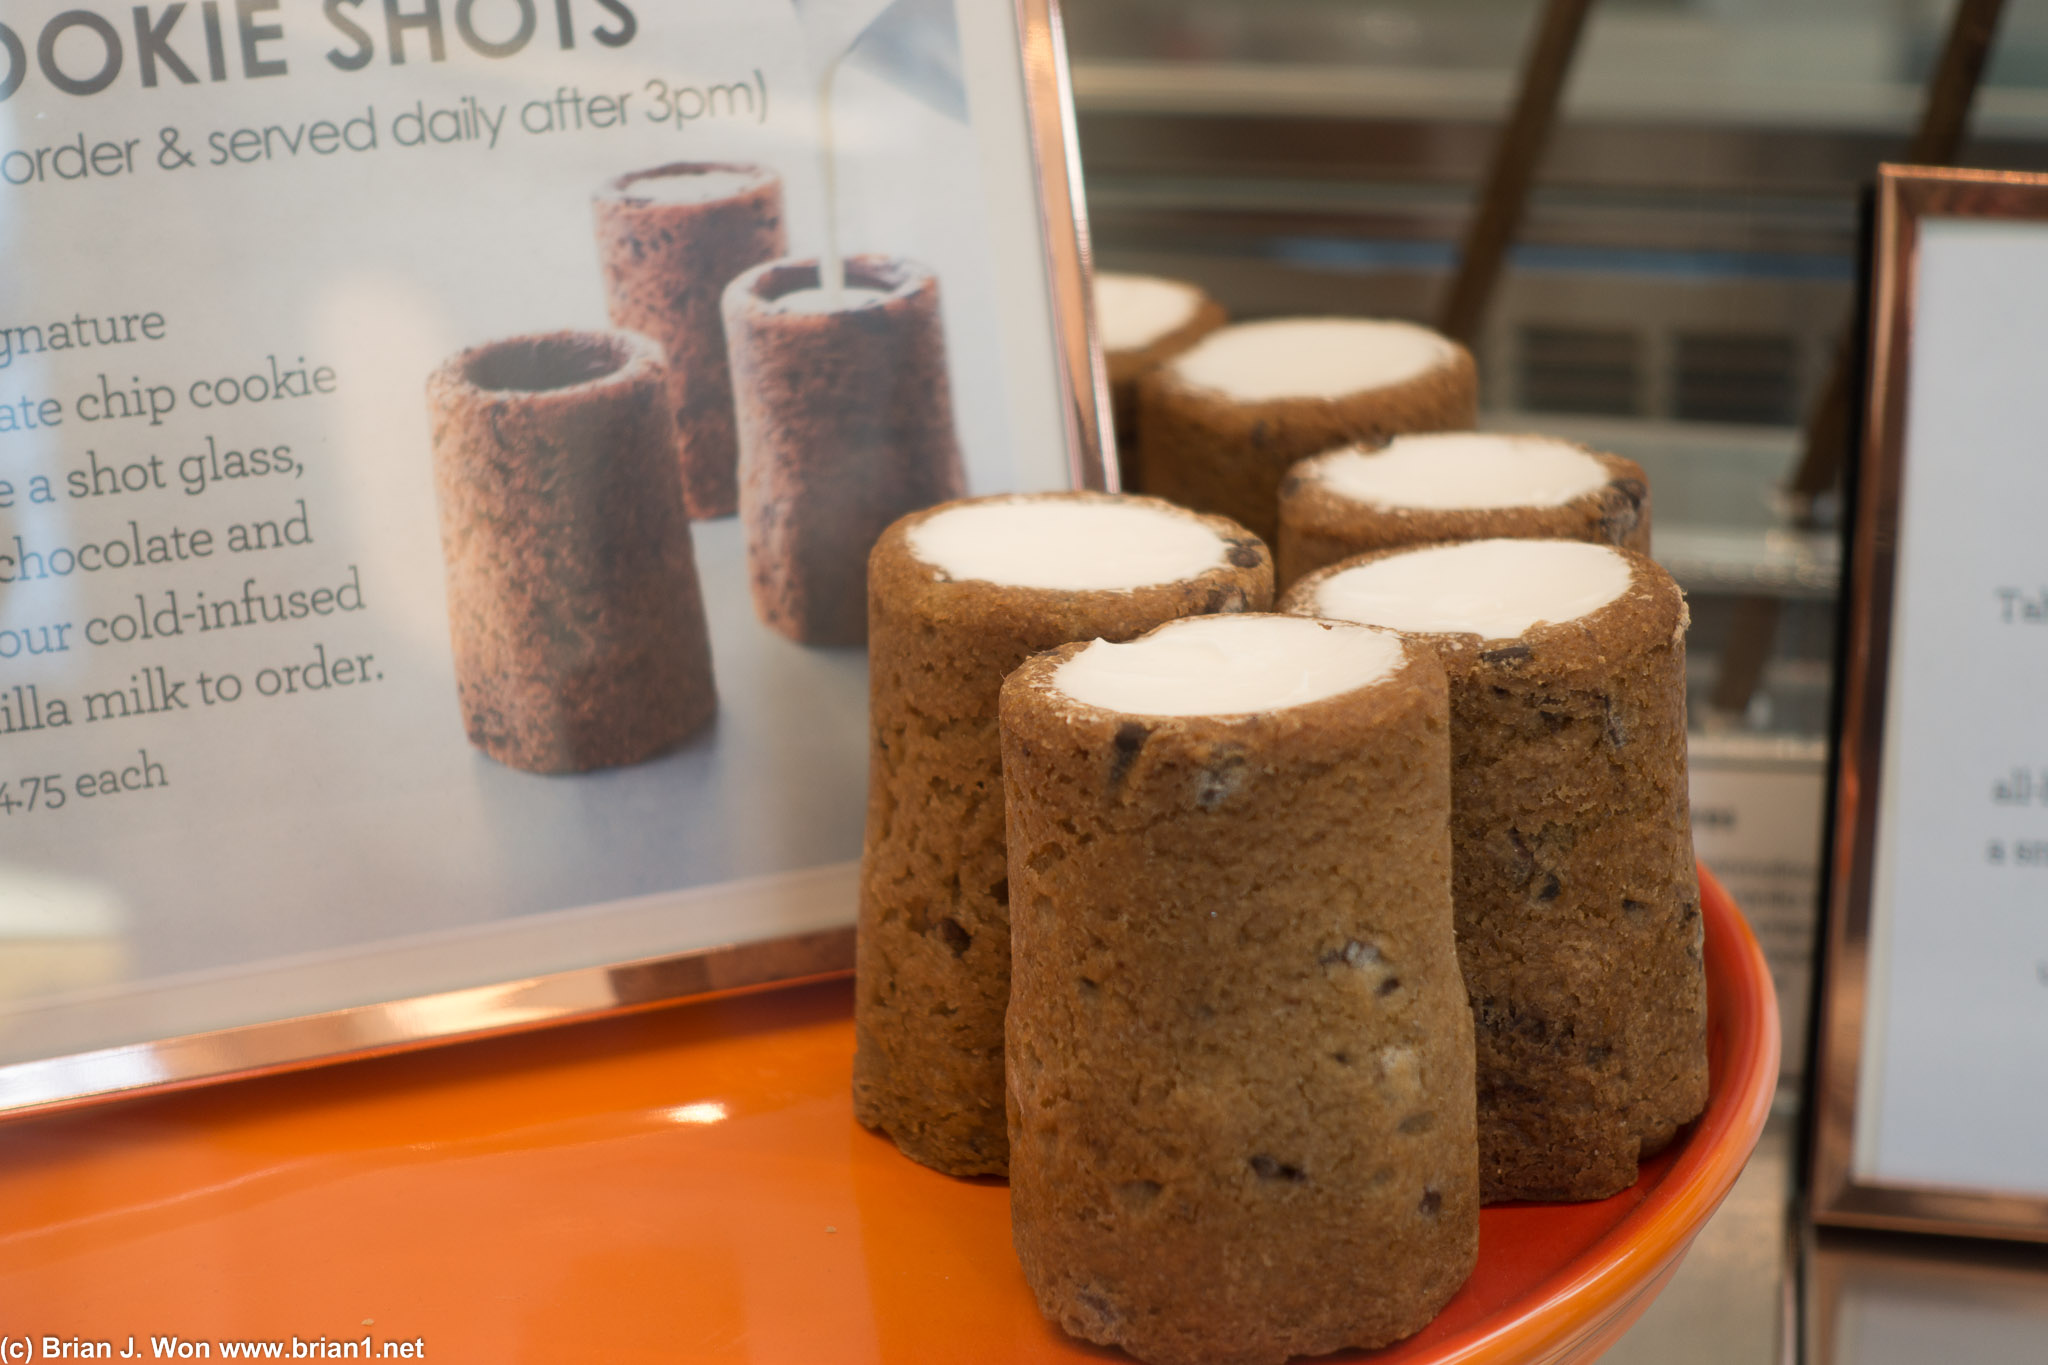 Cookie shots are after 3pm only.